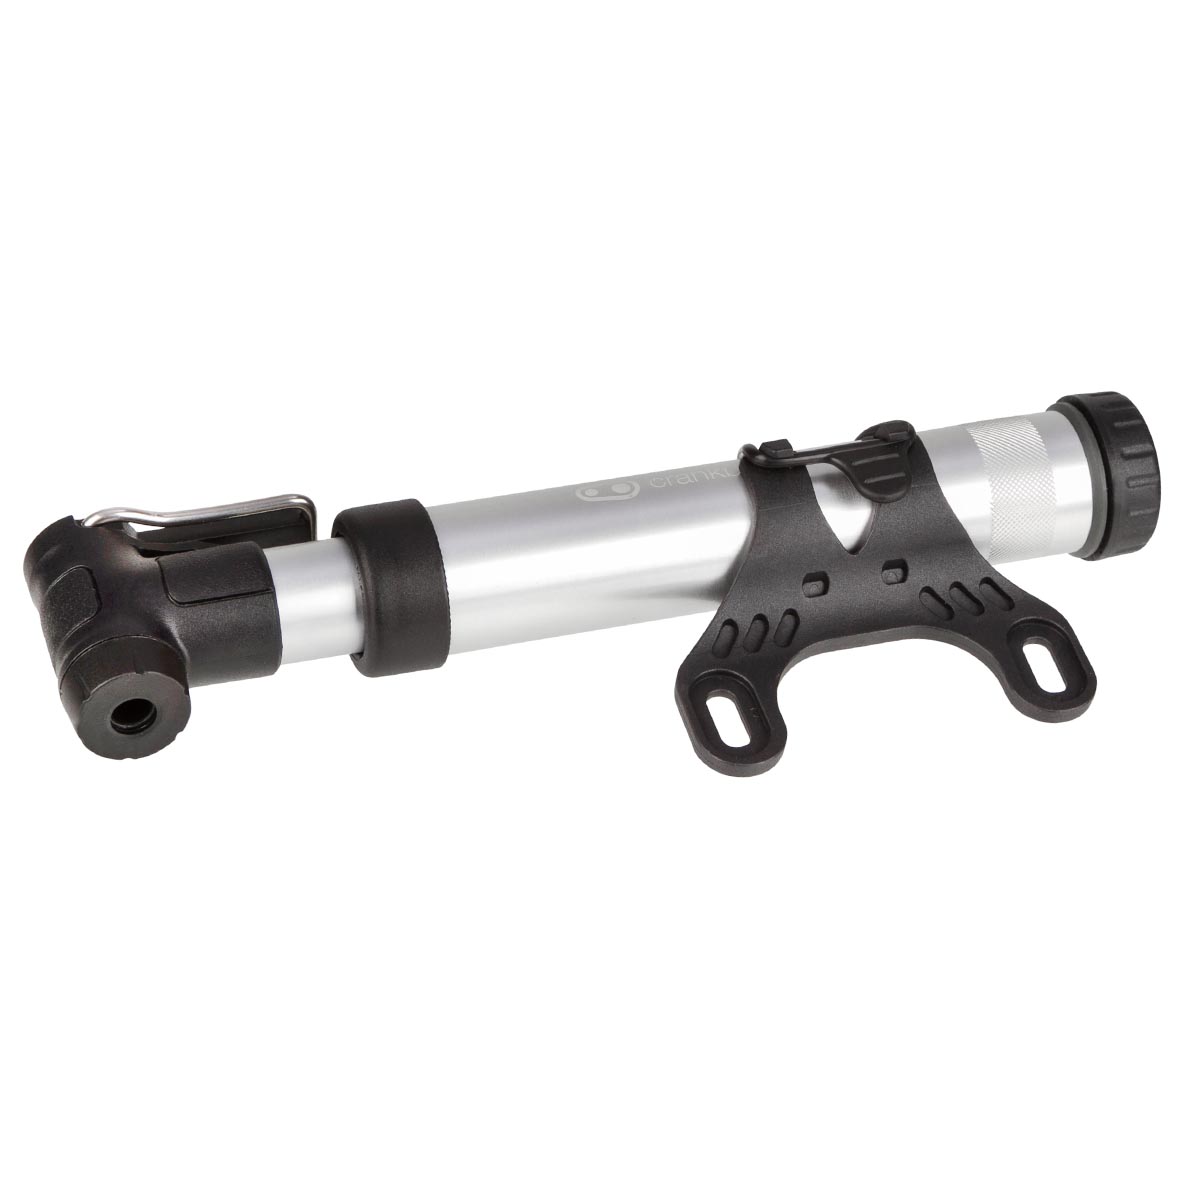 Crankbrothers Hand Pump Gem L incl. Frame Mounting, Silver